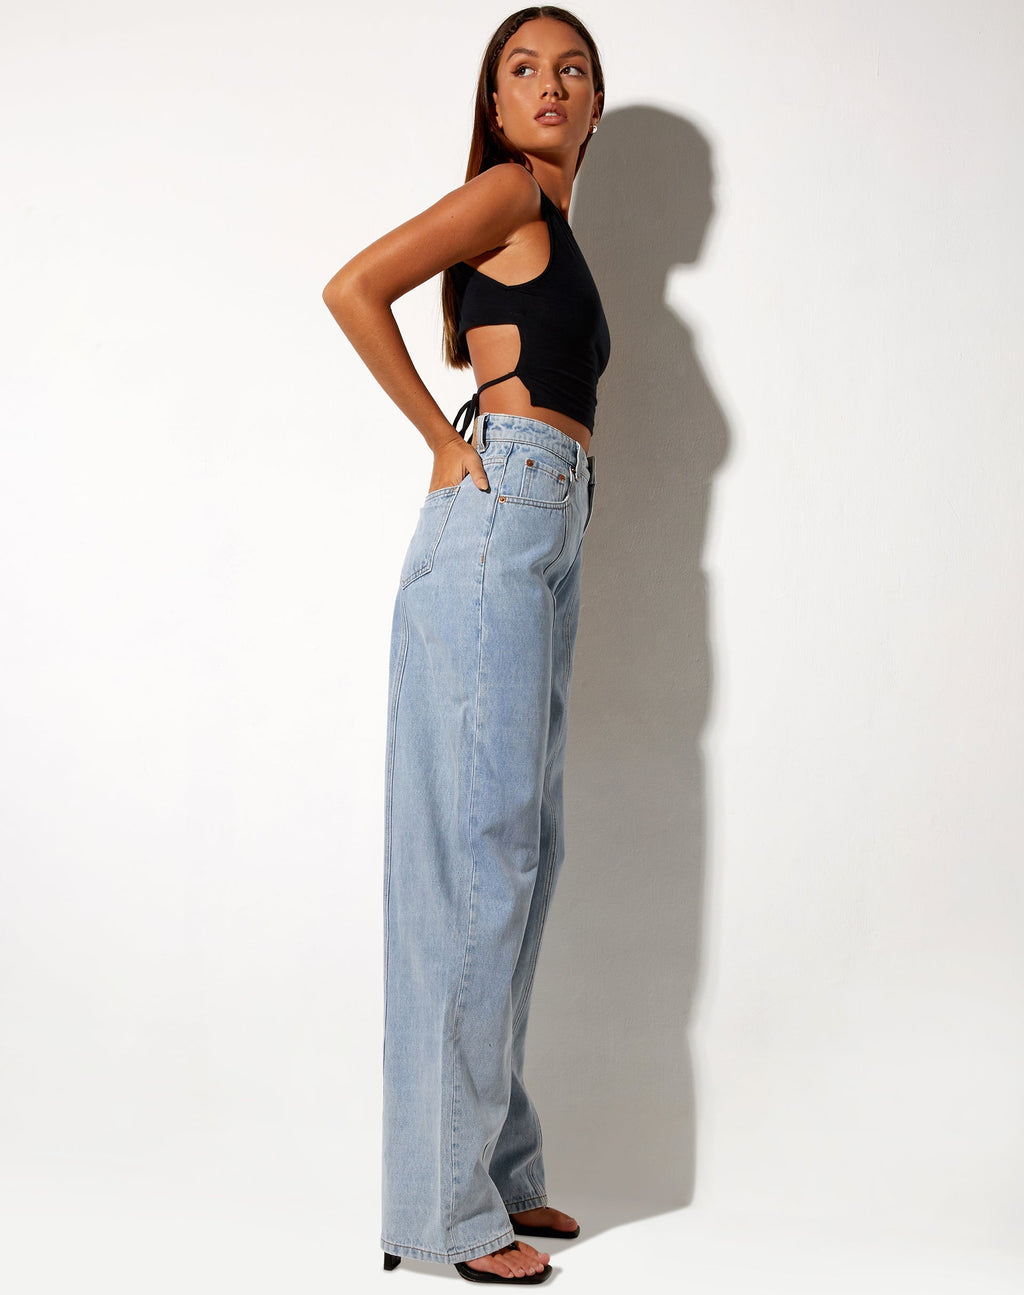 Seam Parallel Jeans in Light Wash Blue